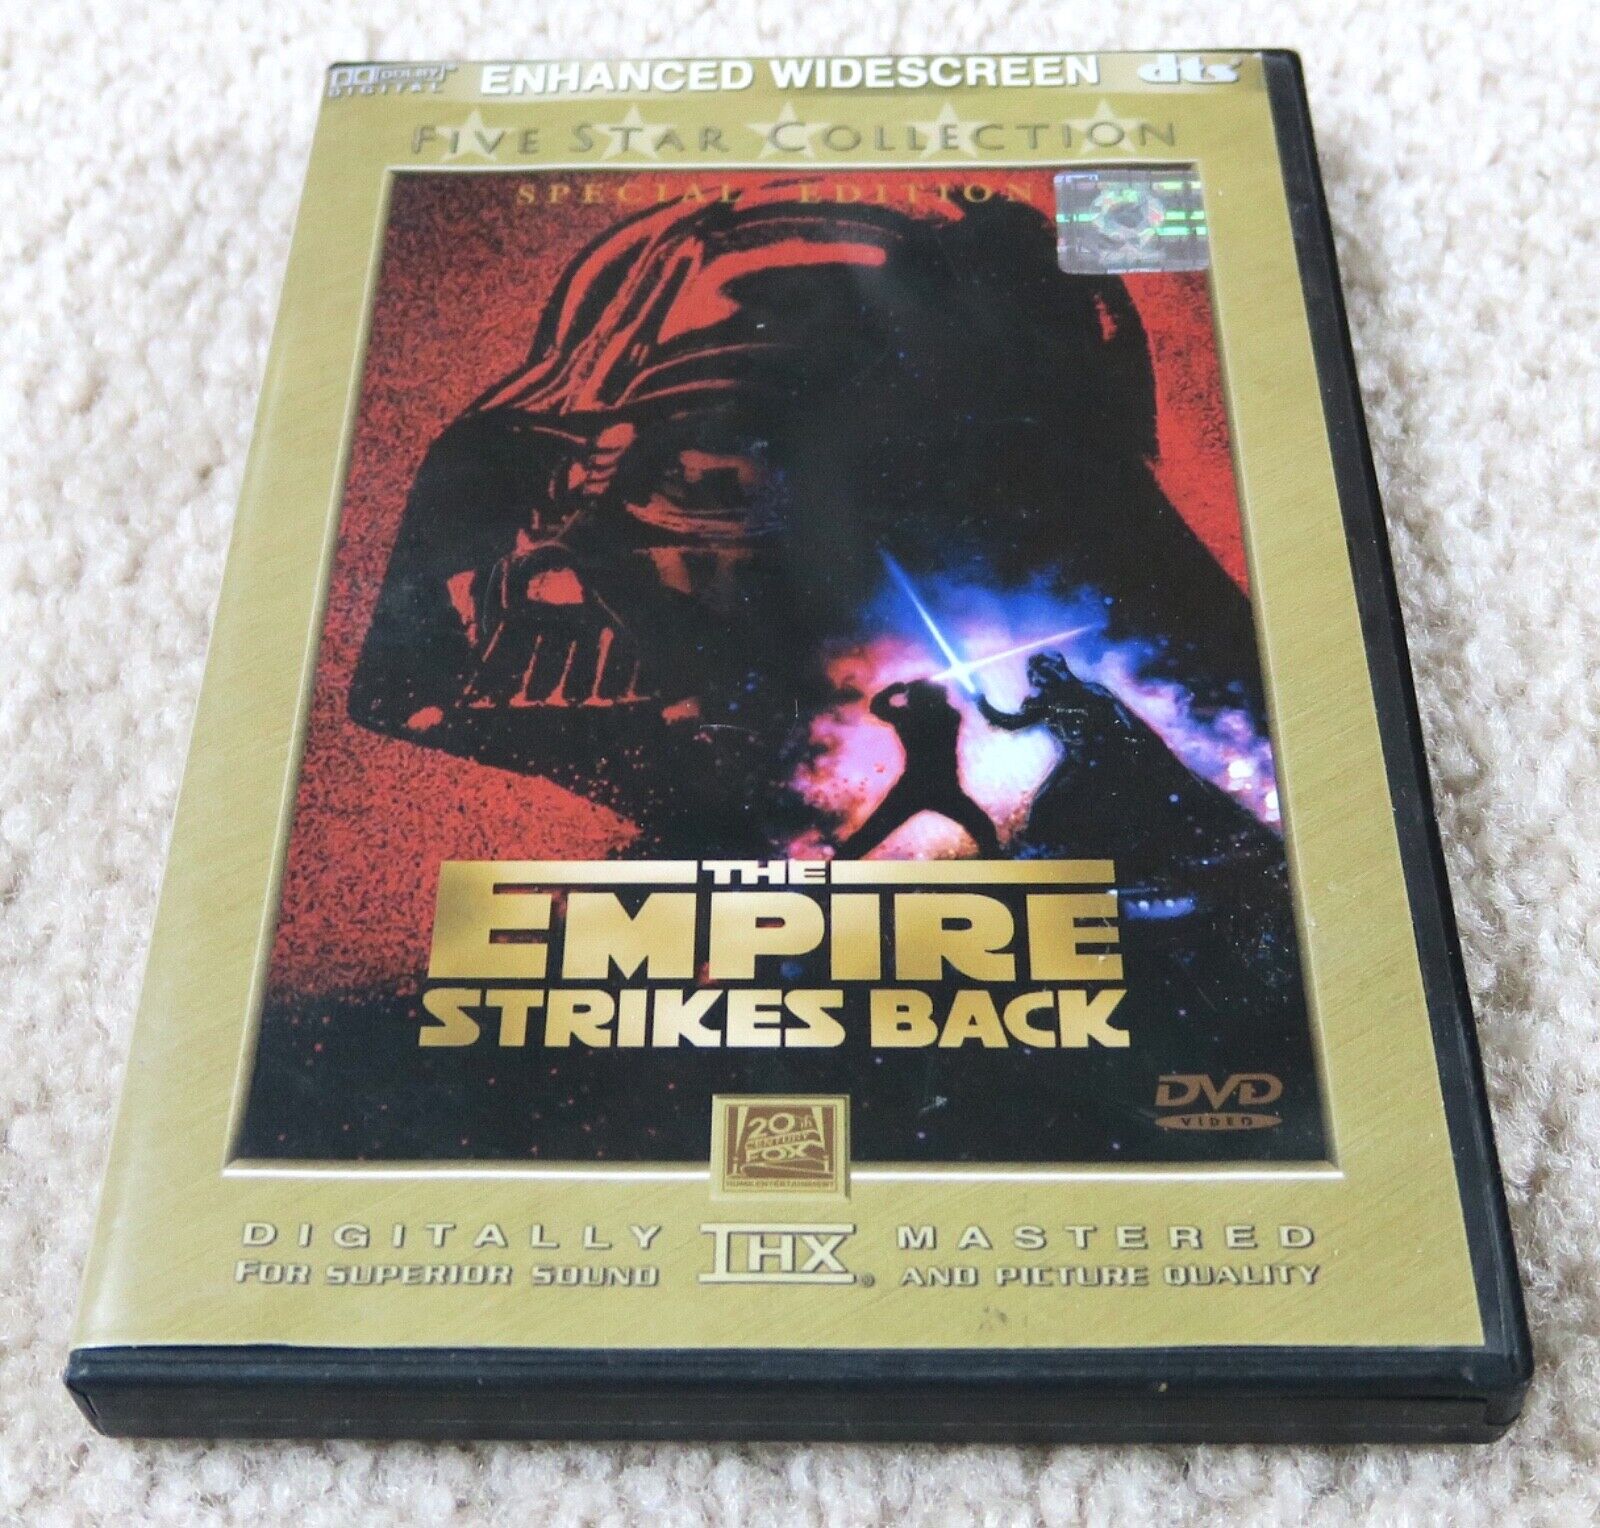 Star Wars Five Star Collection Widescreen DVD The Empire Strikes Back